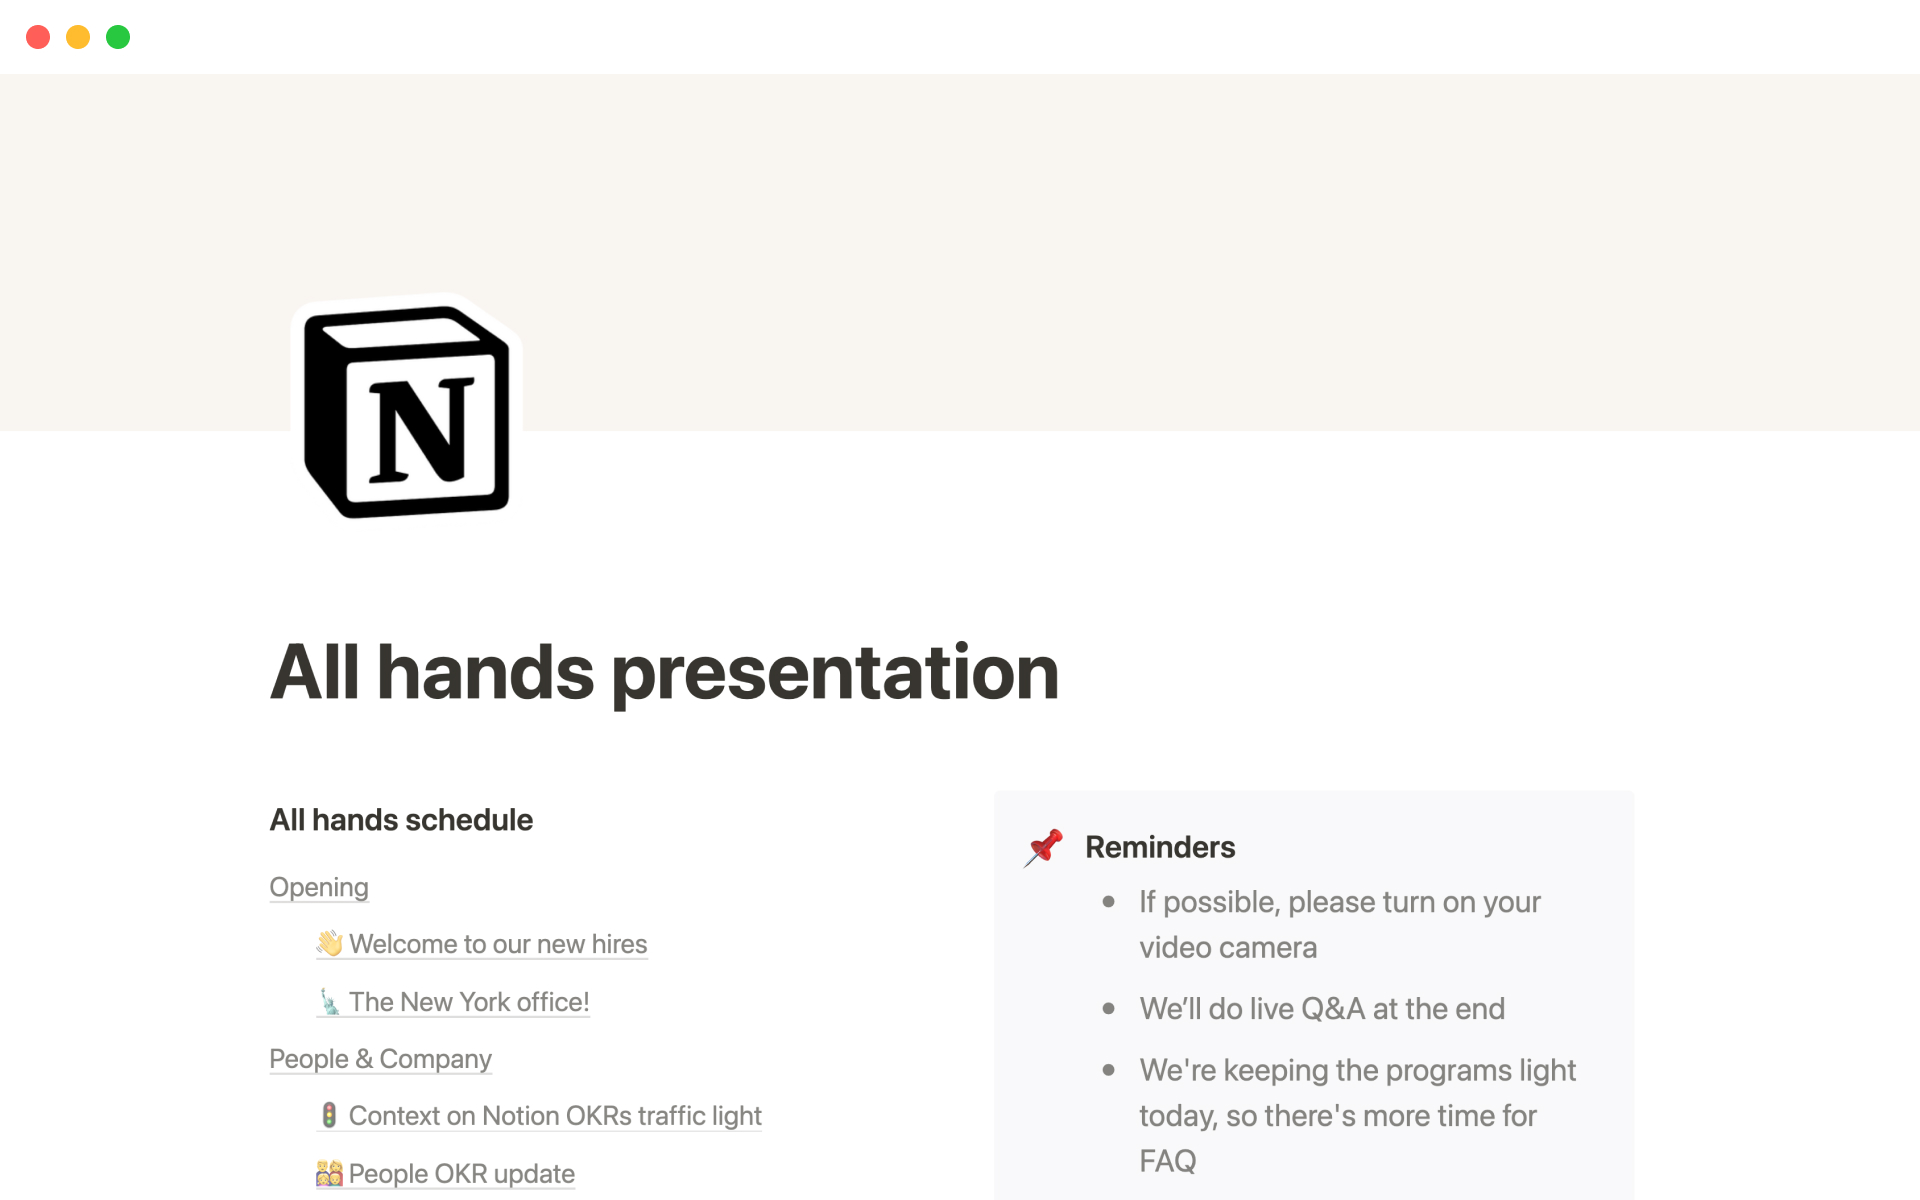 The desktop image for the Notion's all hands presentation template